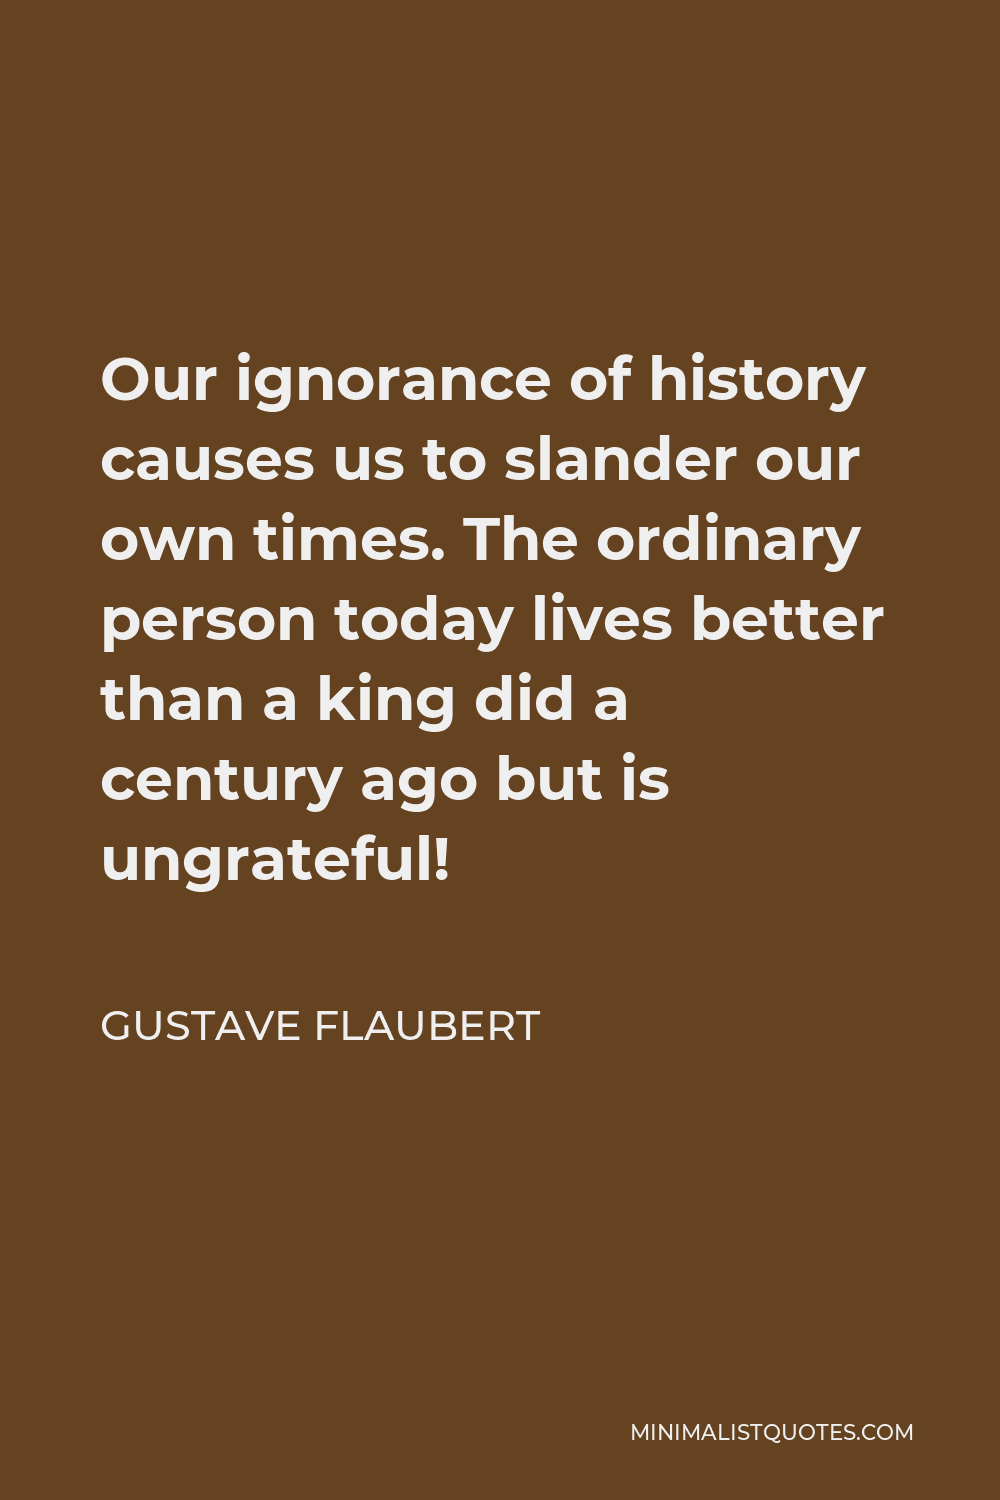 Gustave Flaubert Quote - Our ignorance of history causes us to slander our own times. The ordinary person today lives better than a king did a century ago but is ungrateful!